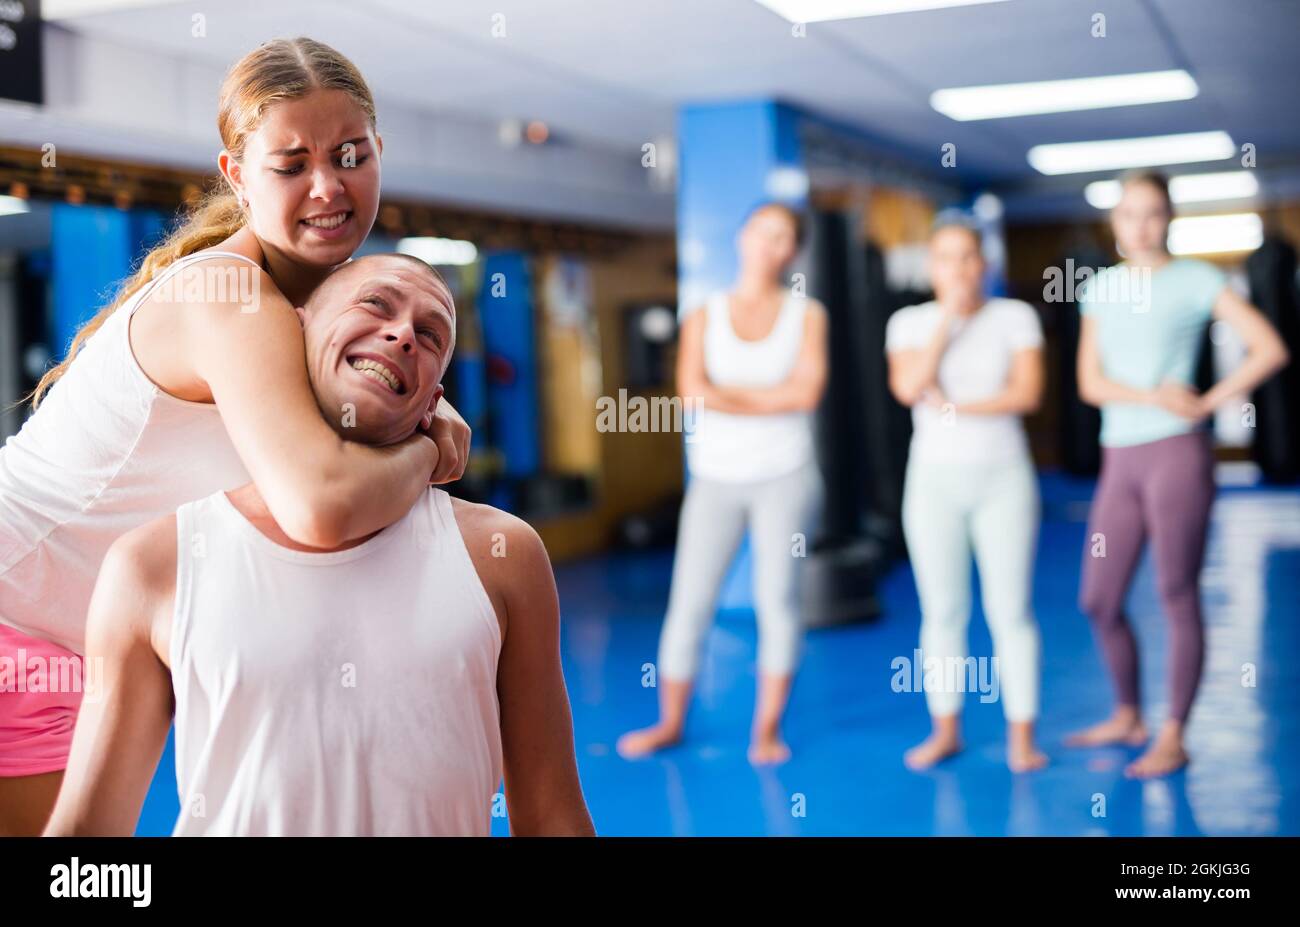 Young woman performing chokehold Stock Photo - Alamy